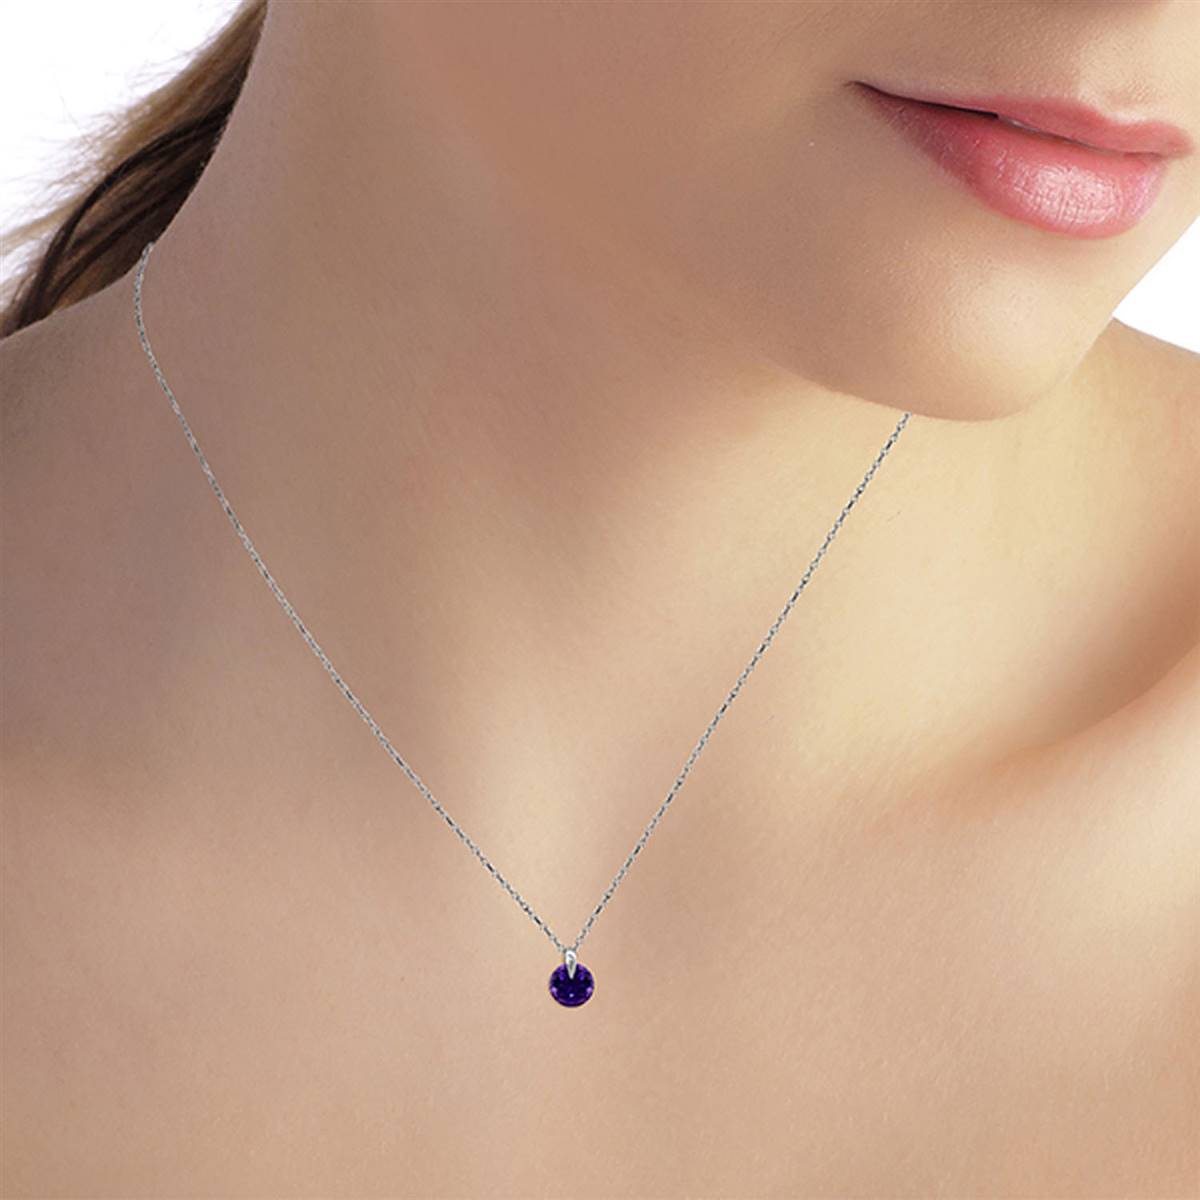 0.75 Carat 14K Solid White Gold Leading Beauty Amethyst Necklace